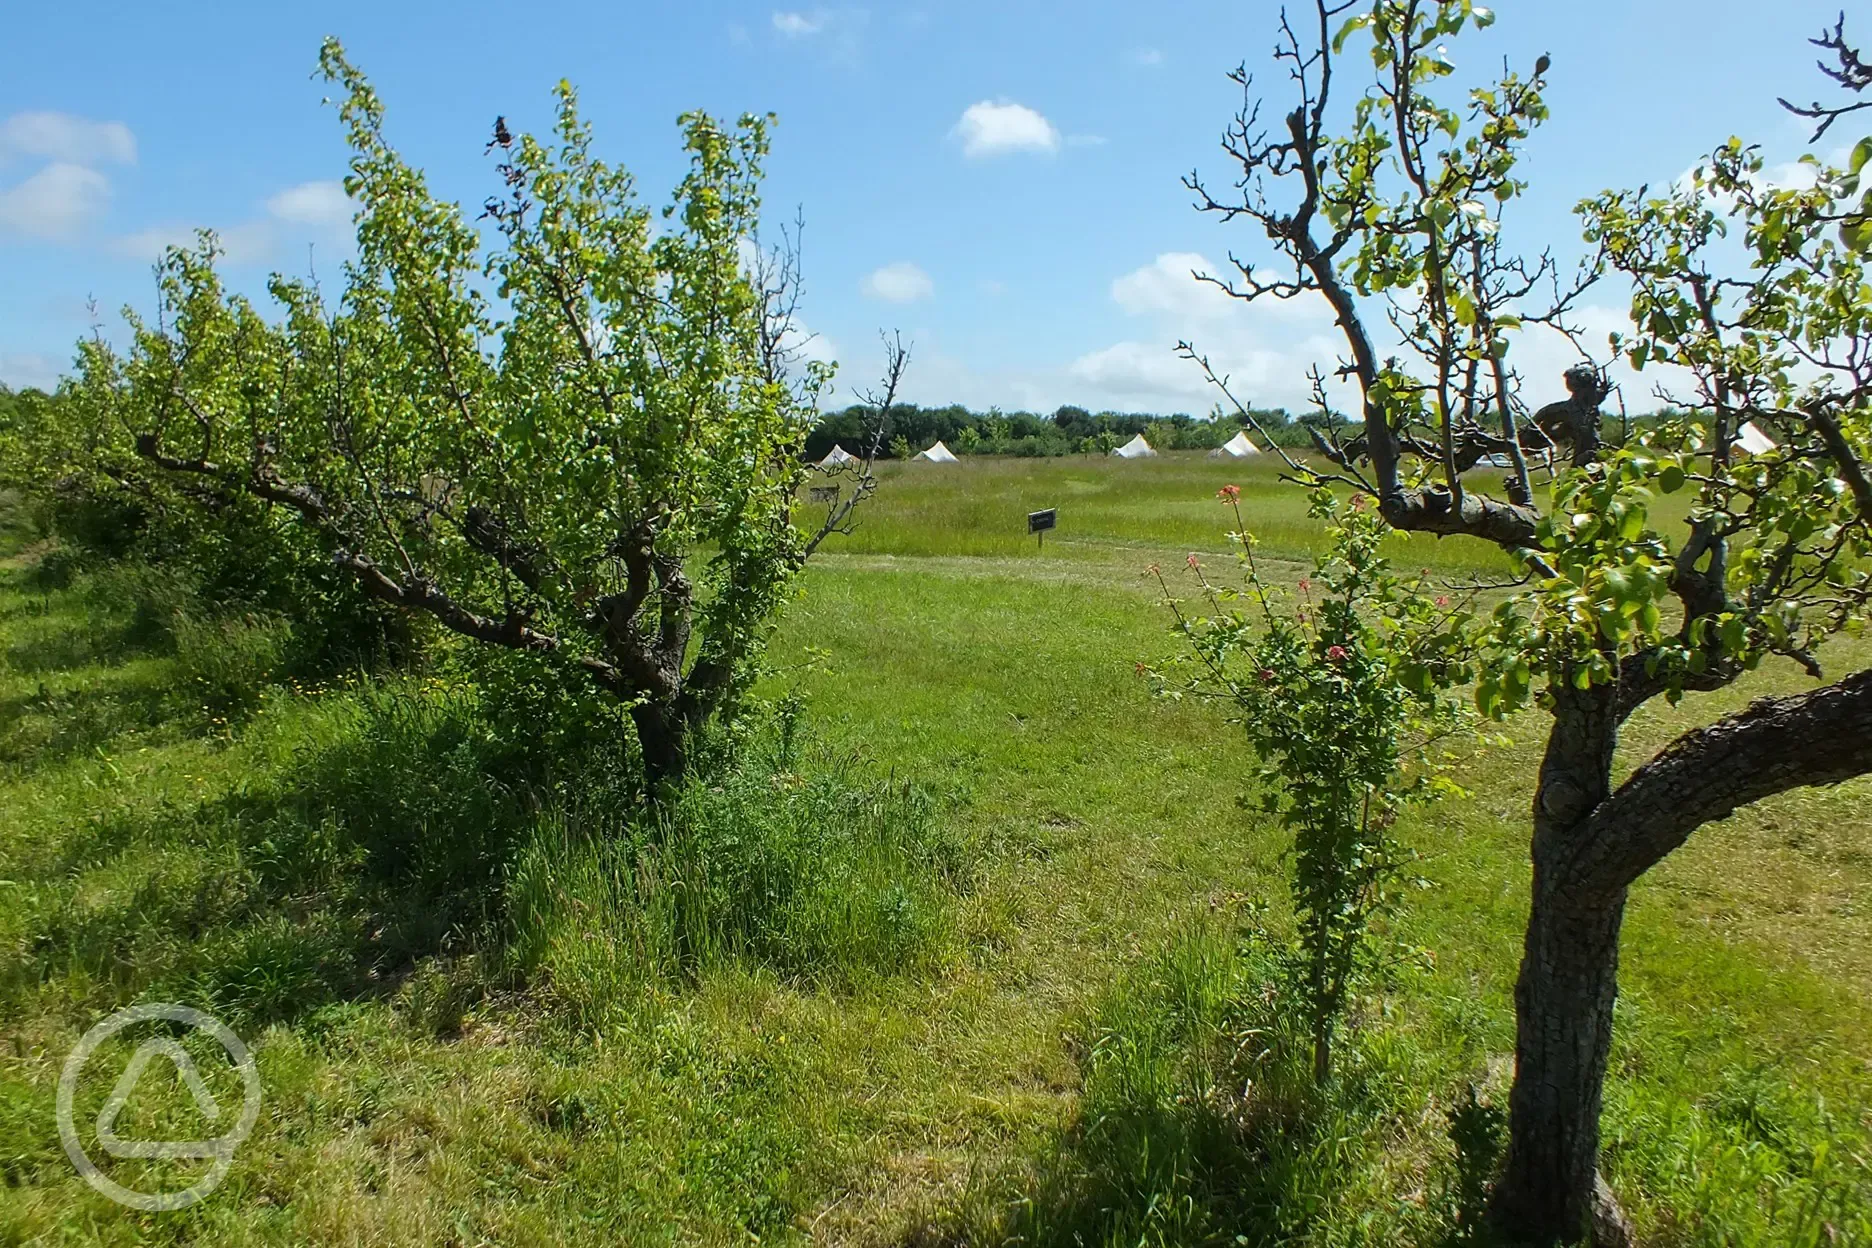 Bell tents through the orchard trees